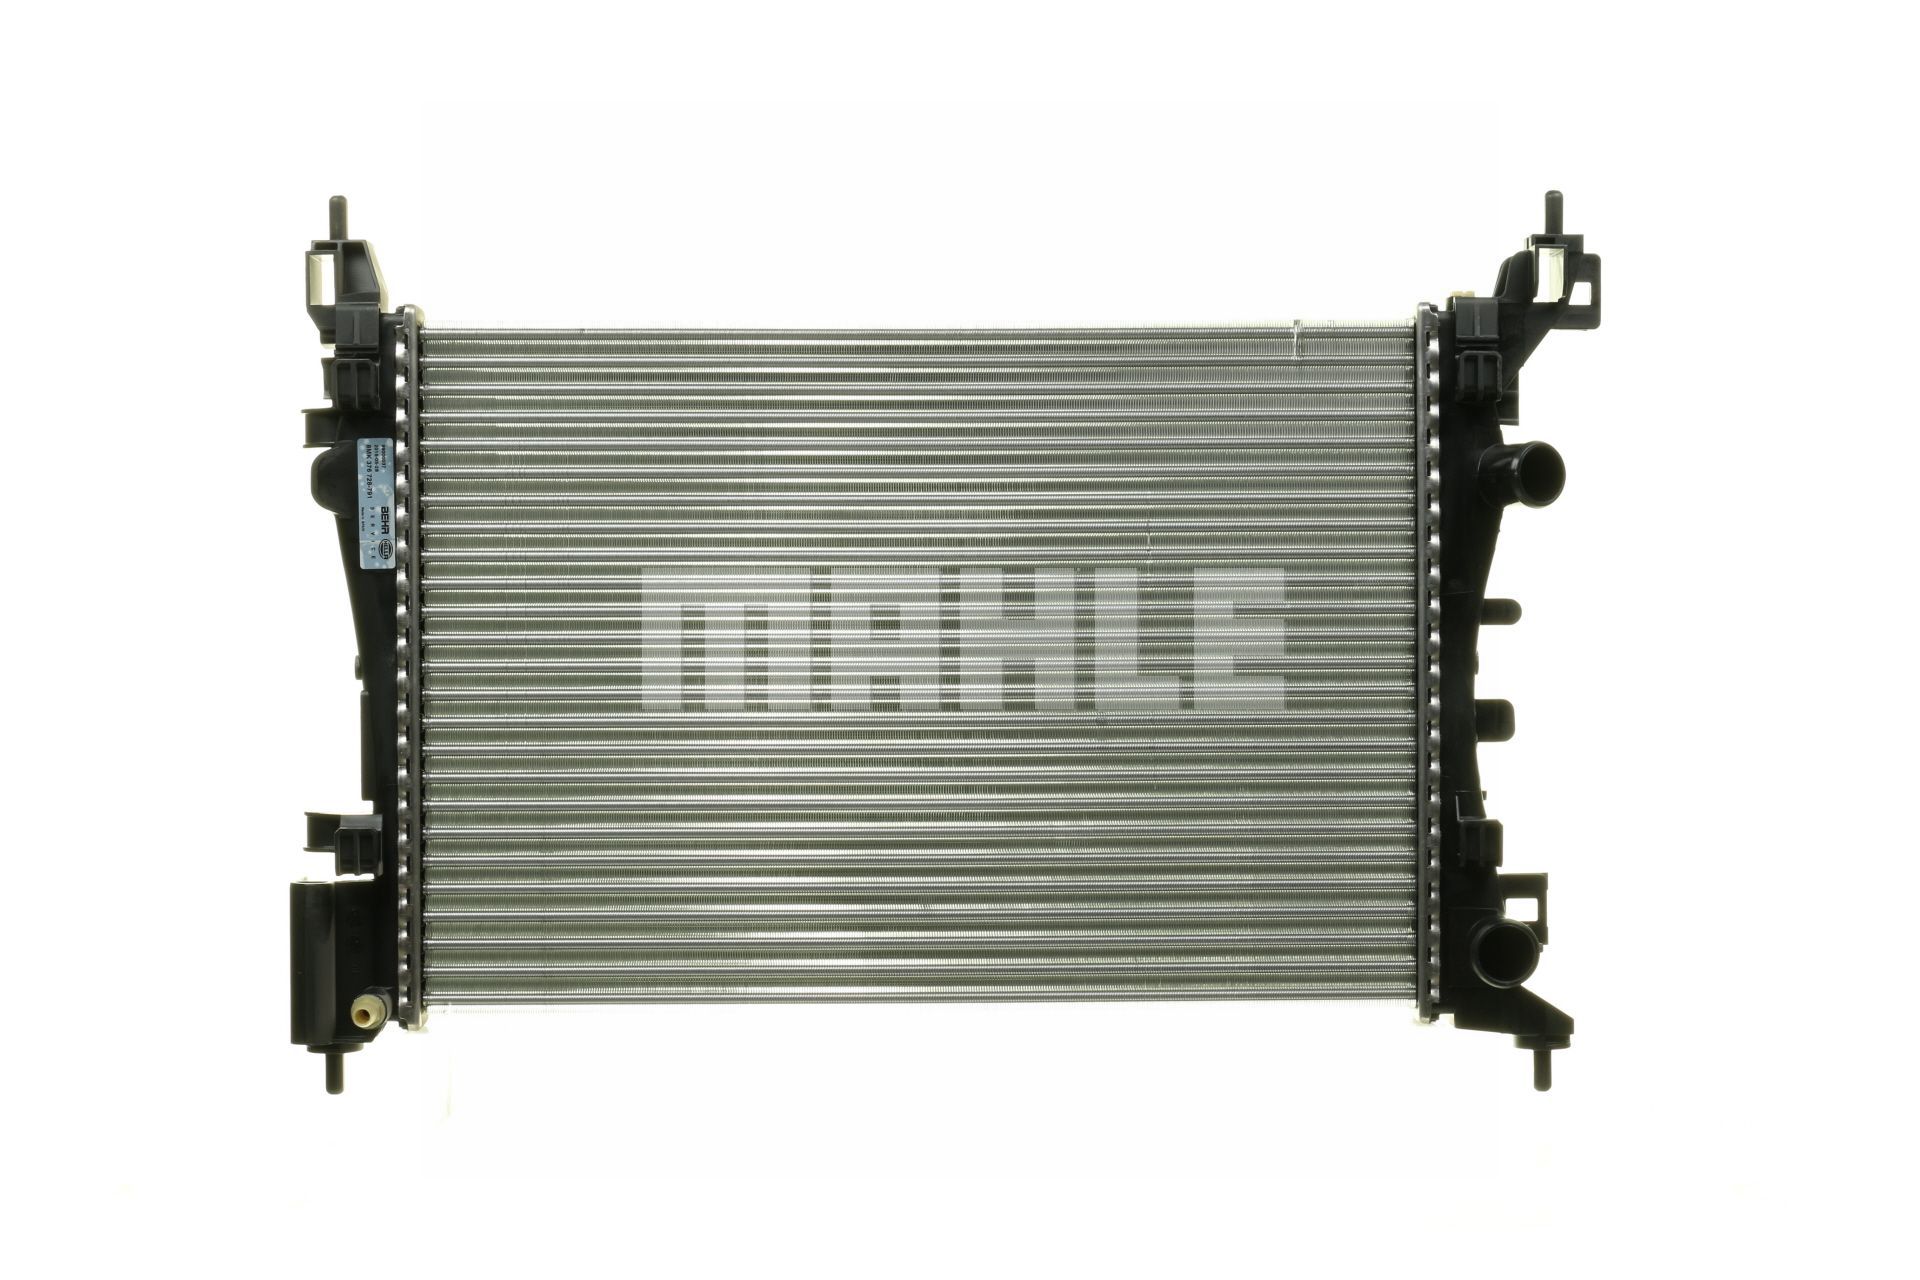 MAHLE ORIGINAL CR 774 000P Engine radiator for vehicles with/without air conditioning, 540 x 375 x 26 mm, Manual Transmission, Mechanically jointed cooling fins